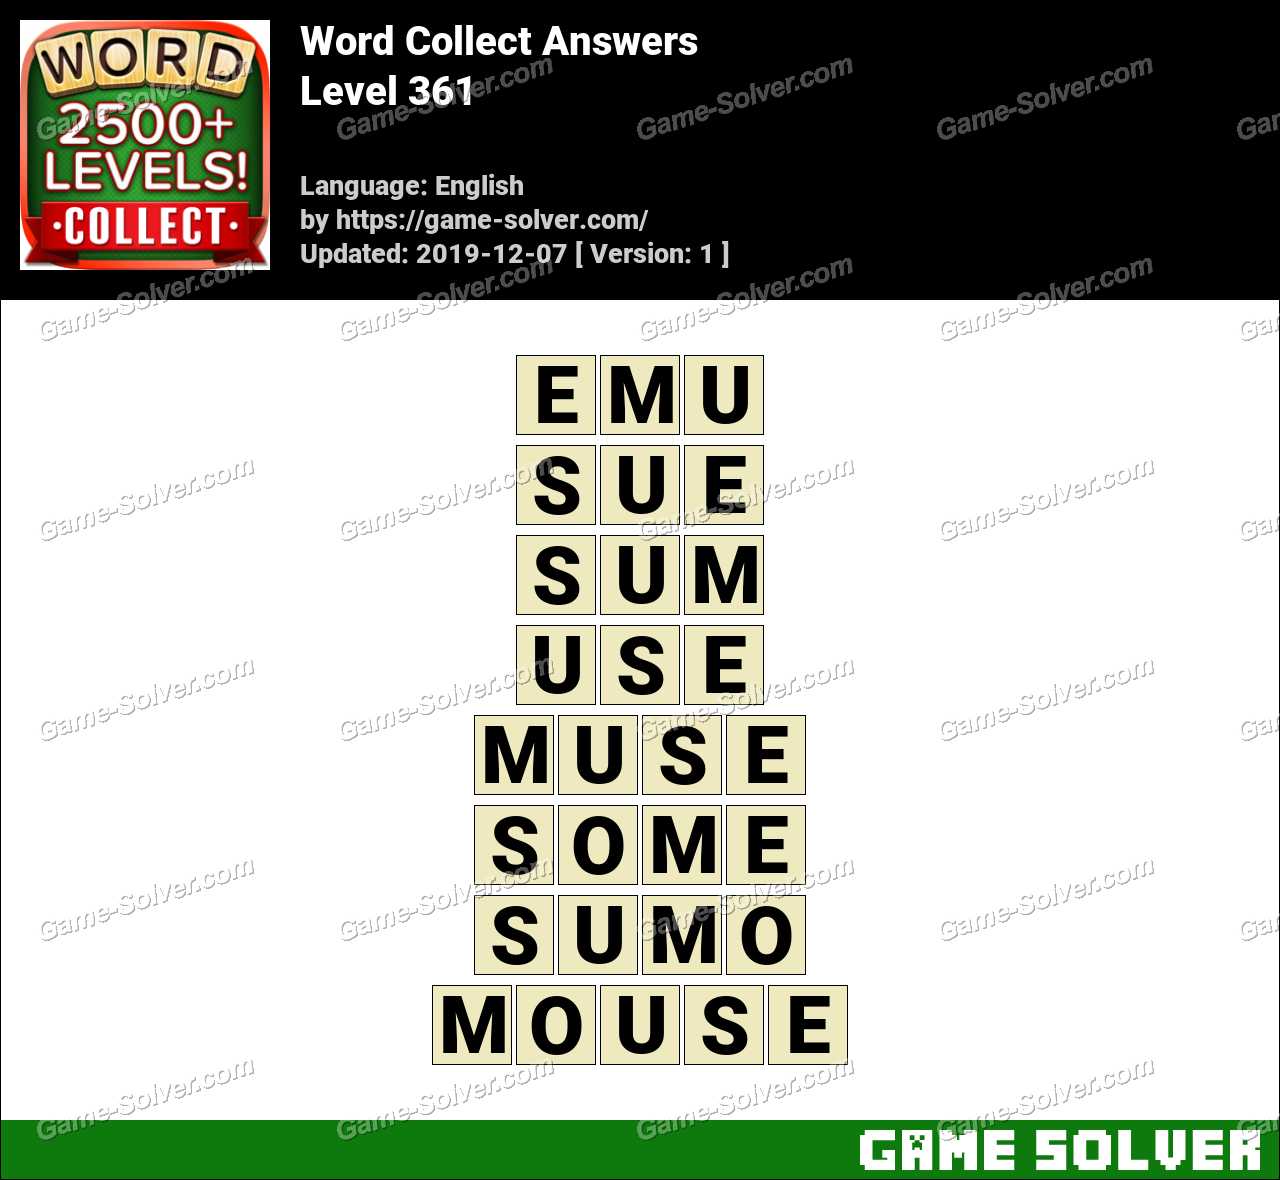 Word Collect Level 361 Answers • Game Solver